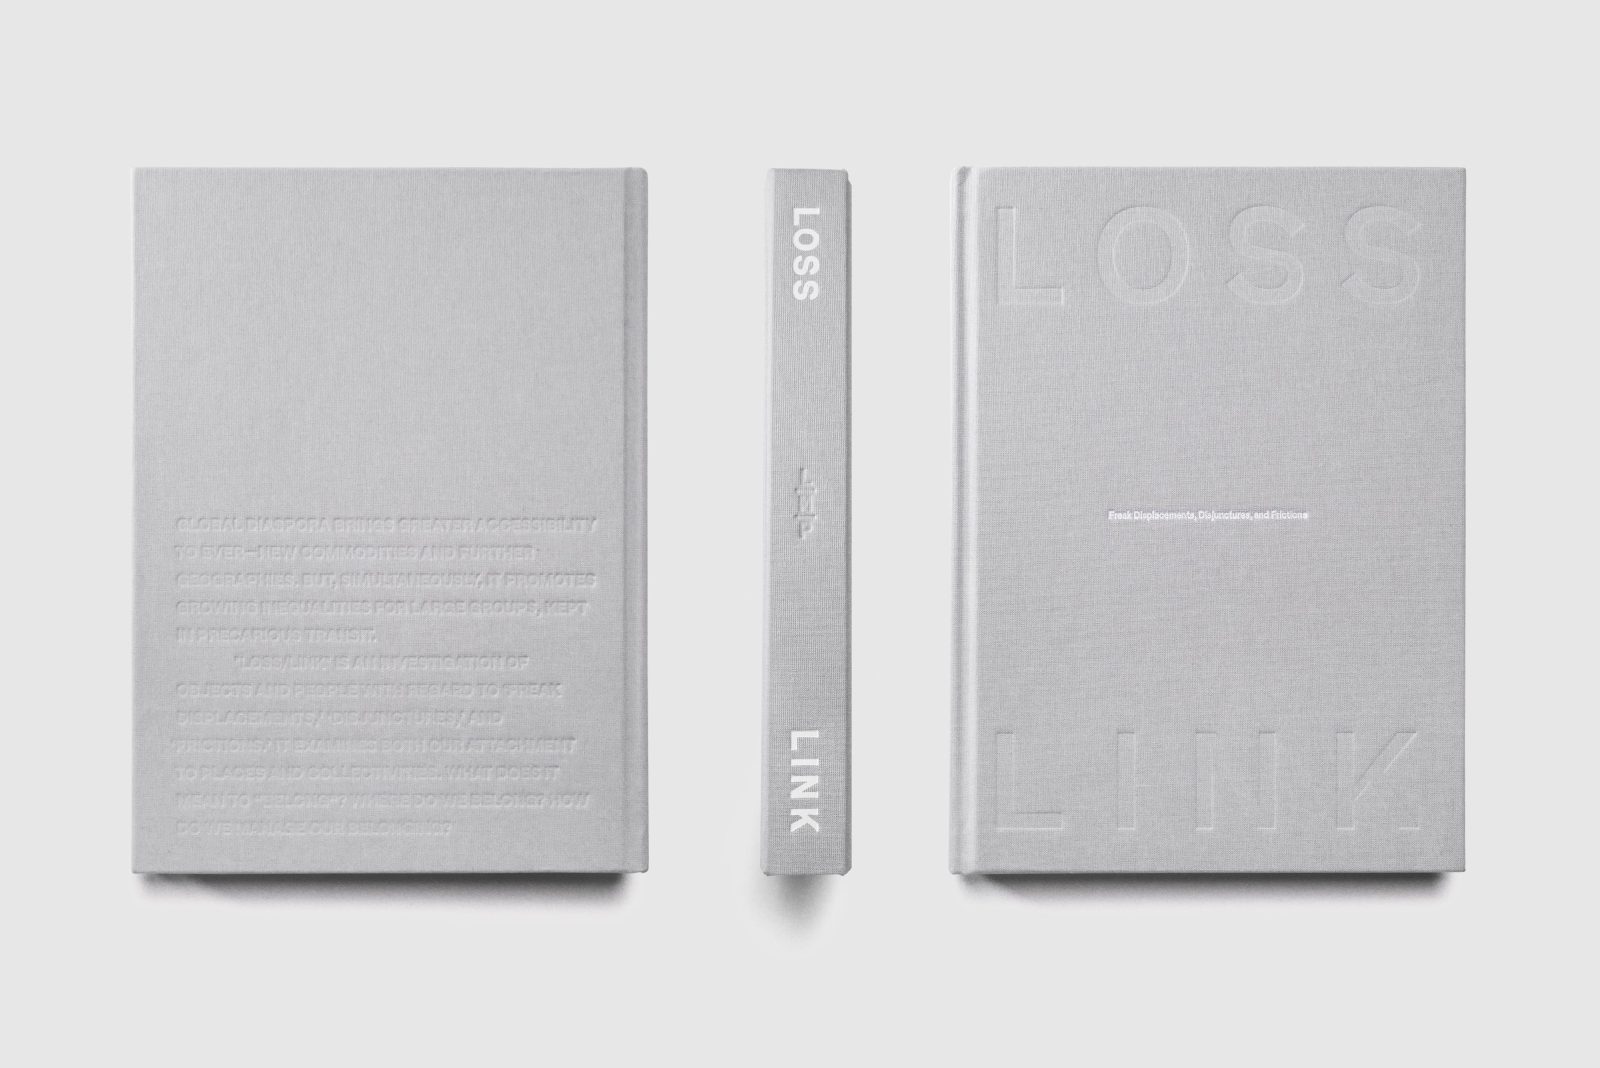 Loss/Link Graphic Design for Publication